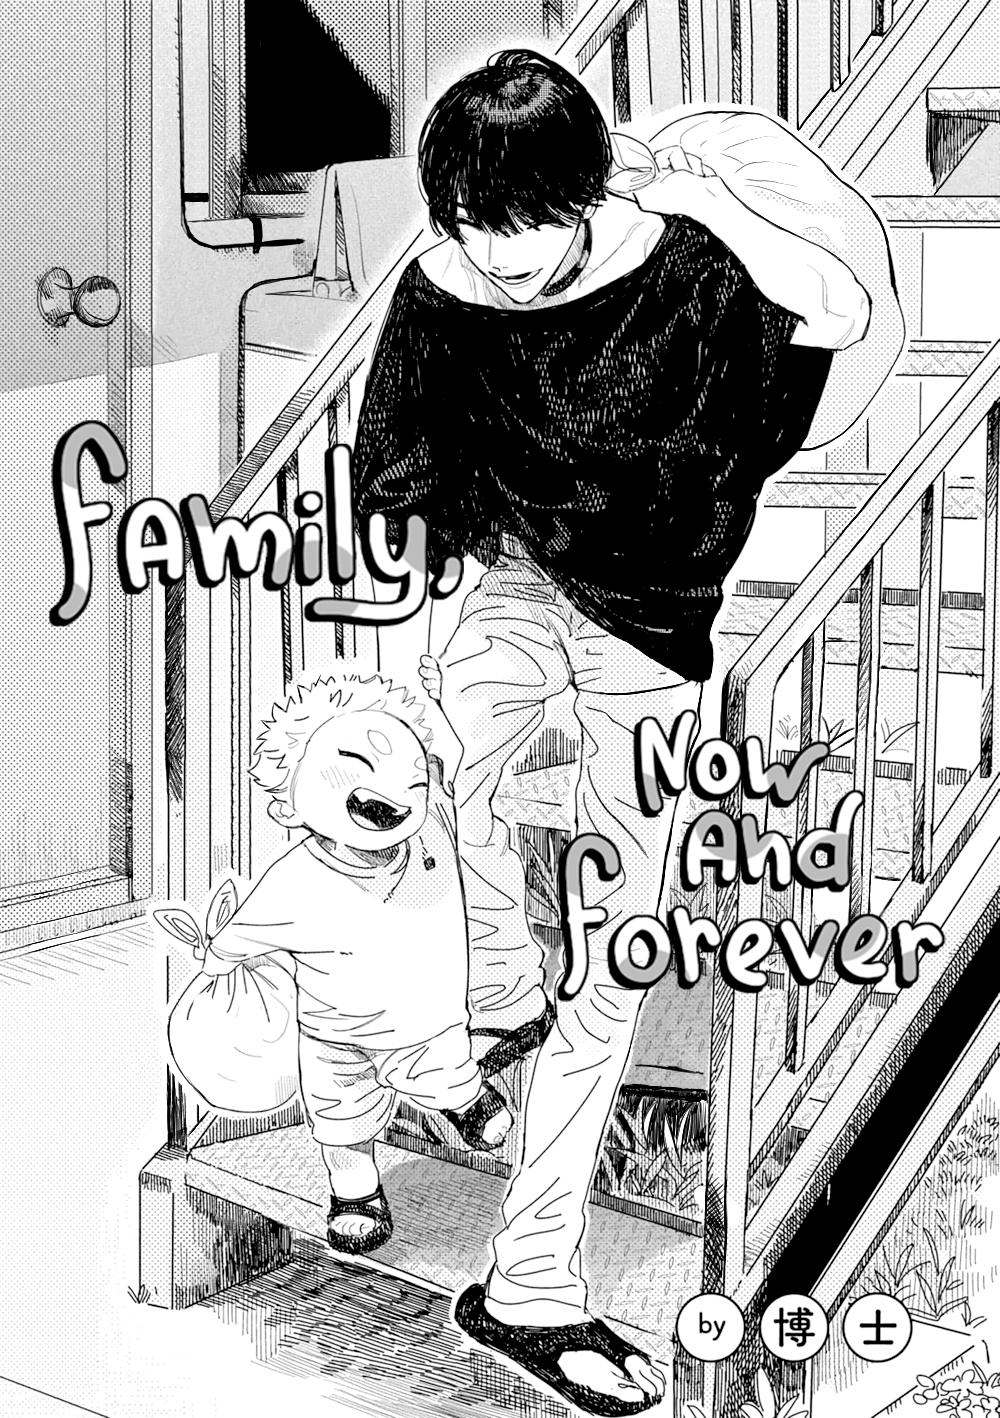 Family, Now And Forever. - Page 3